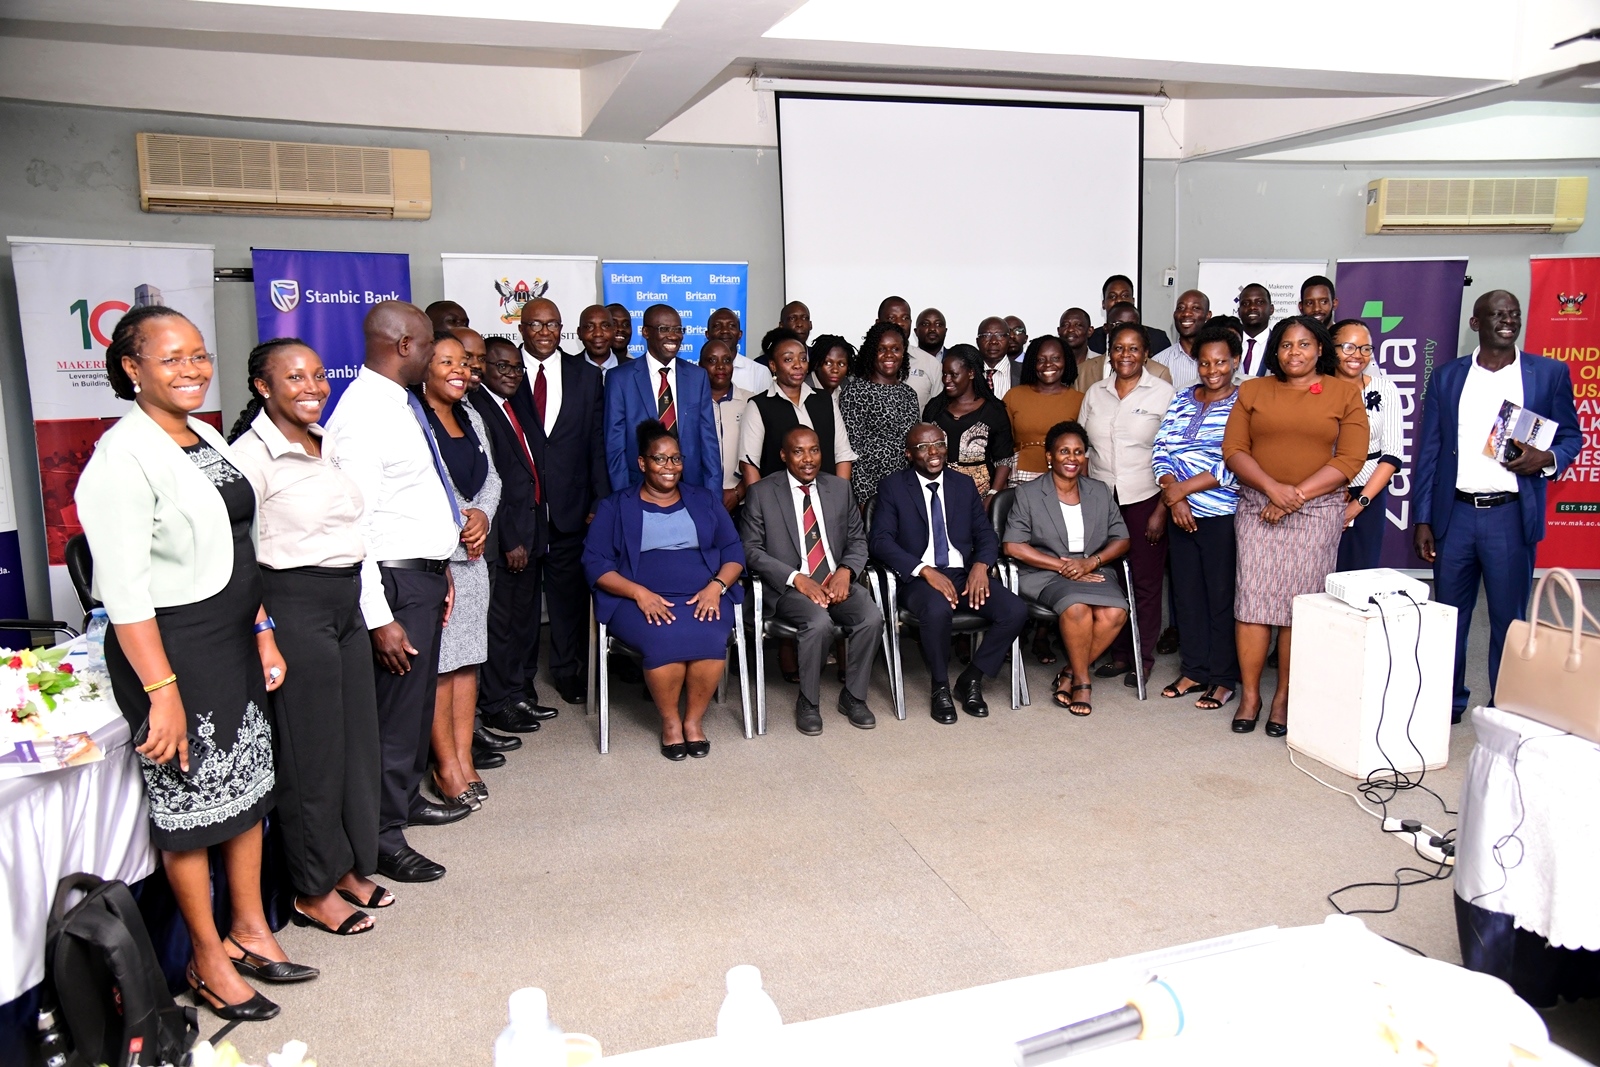 Members of Council and Management join MURBS Trustees, Ambassadors and service providers in a group photo after the presentation of the Scheme's performance for FY 2022/2023 on 24th October 2023. MURBS Presentation of Performance FY 2022/2023, 24th October 2023, Telepresence Centre, Level 2, Senate Building, Makerere University, Kampala Uganda. East Africa.